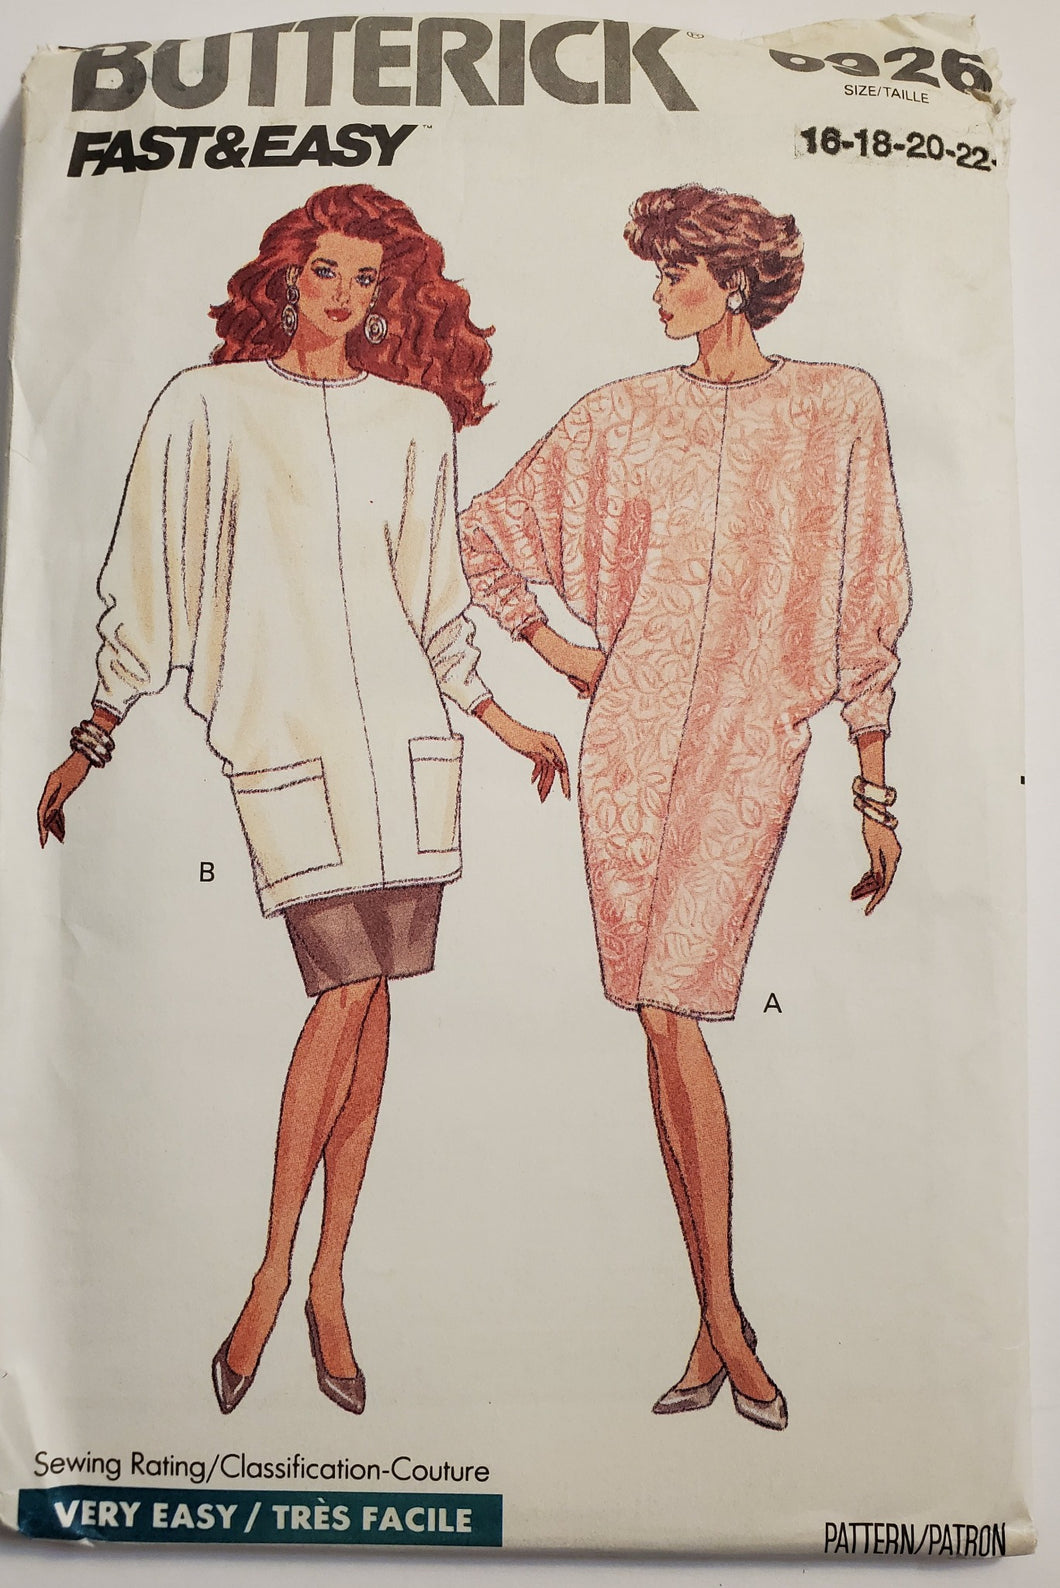 Butterick Pattern 6926, UNCUT, Fast & Easy, Skirts and Tops Size 16-18-20-22, Vintage & Extremely Rare